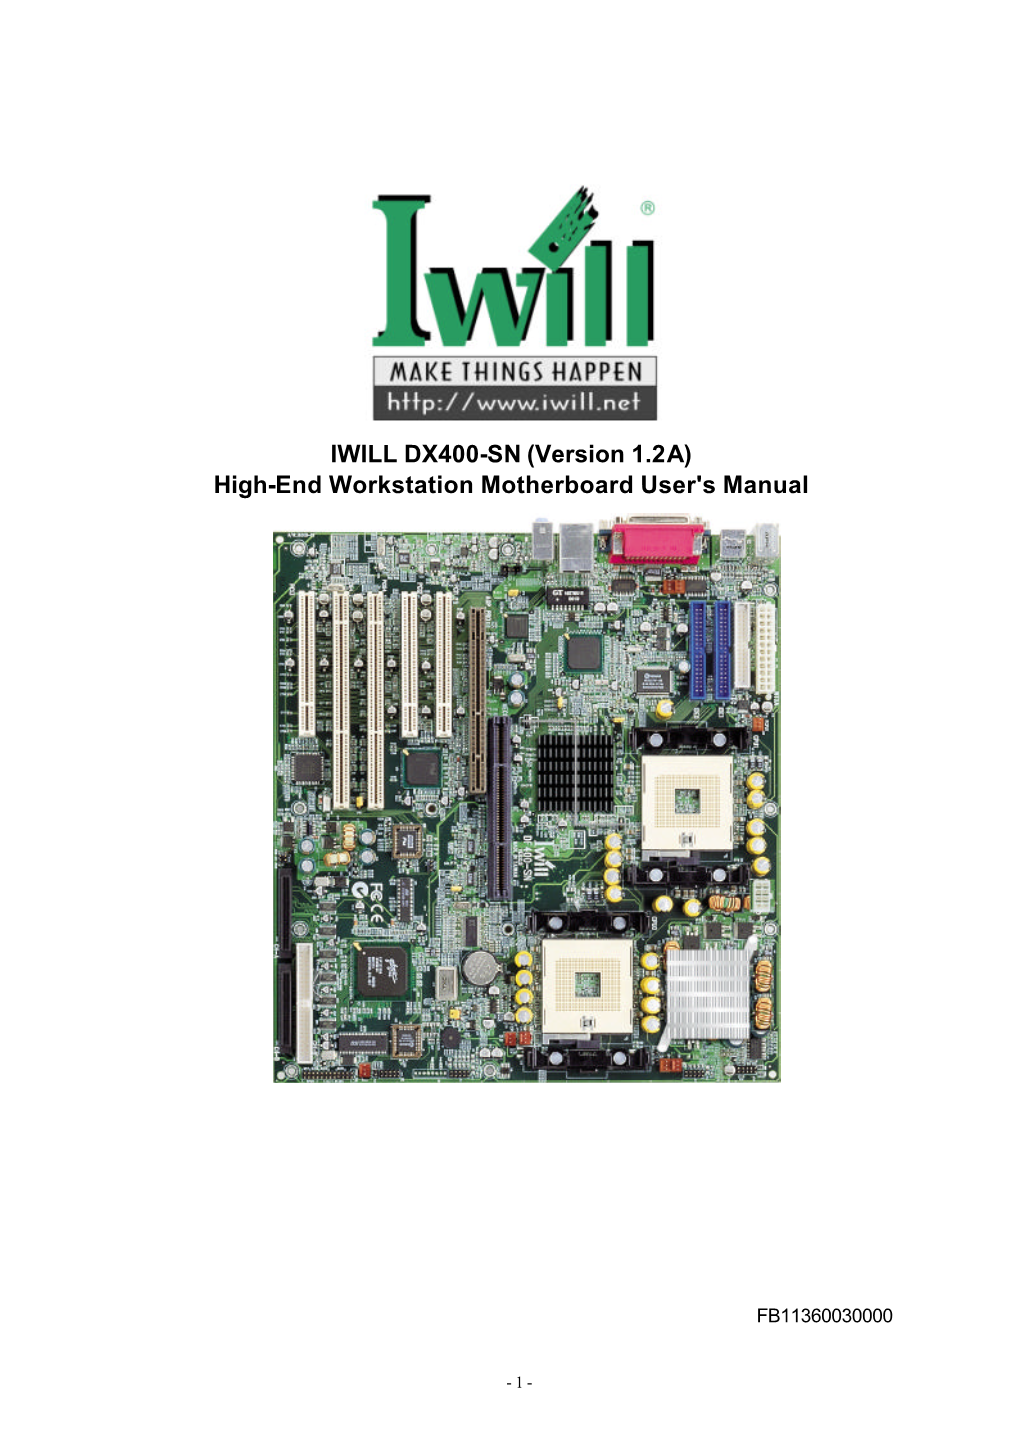 IWILL DX400-SN (Version 1.2A) High-End Workstation Motherboard User's Manual